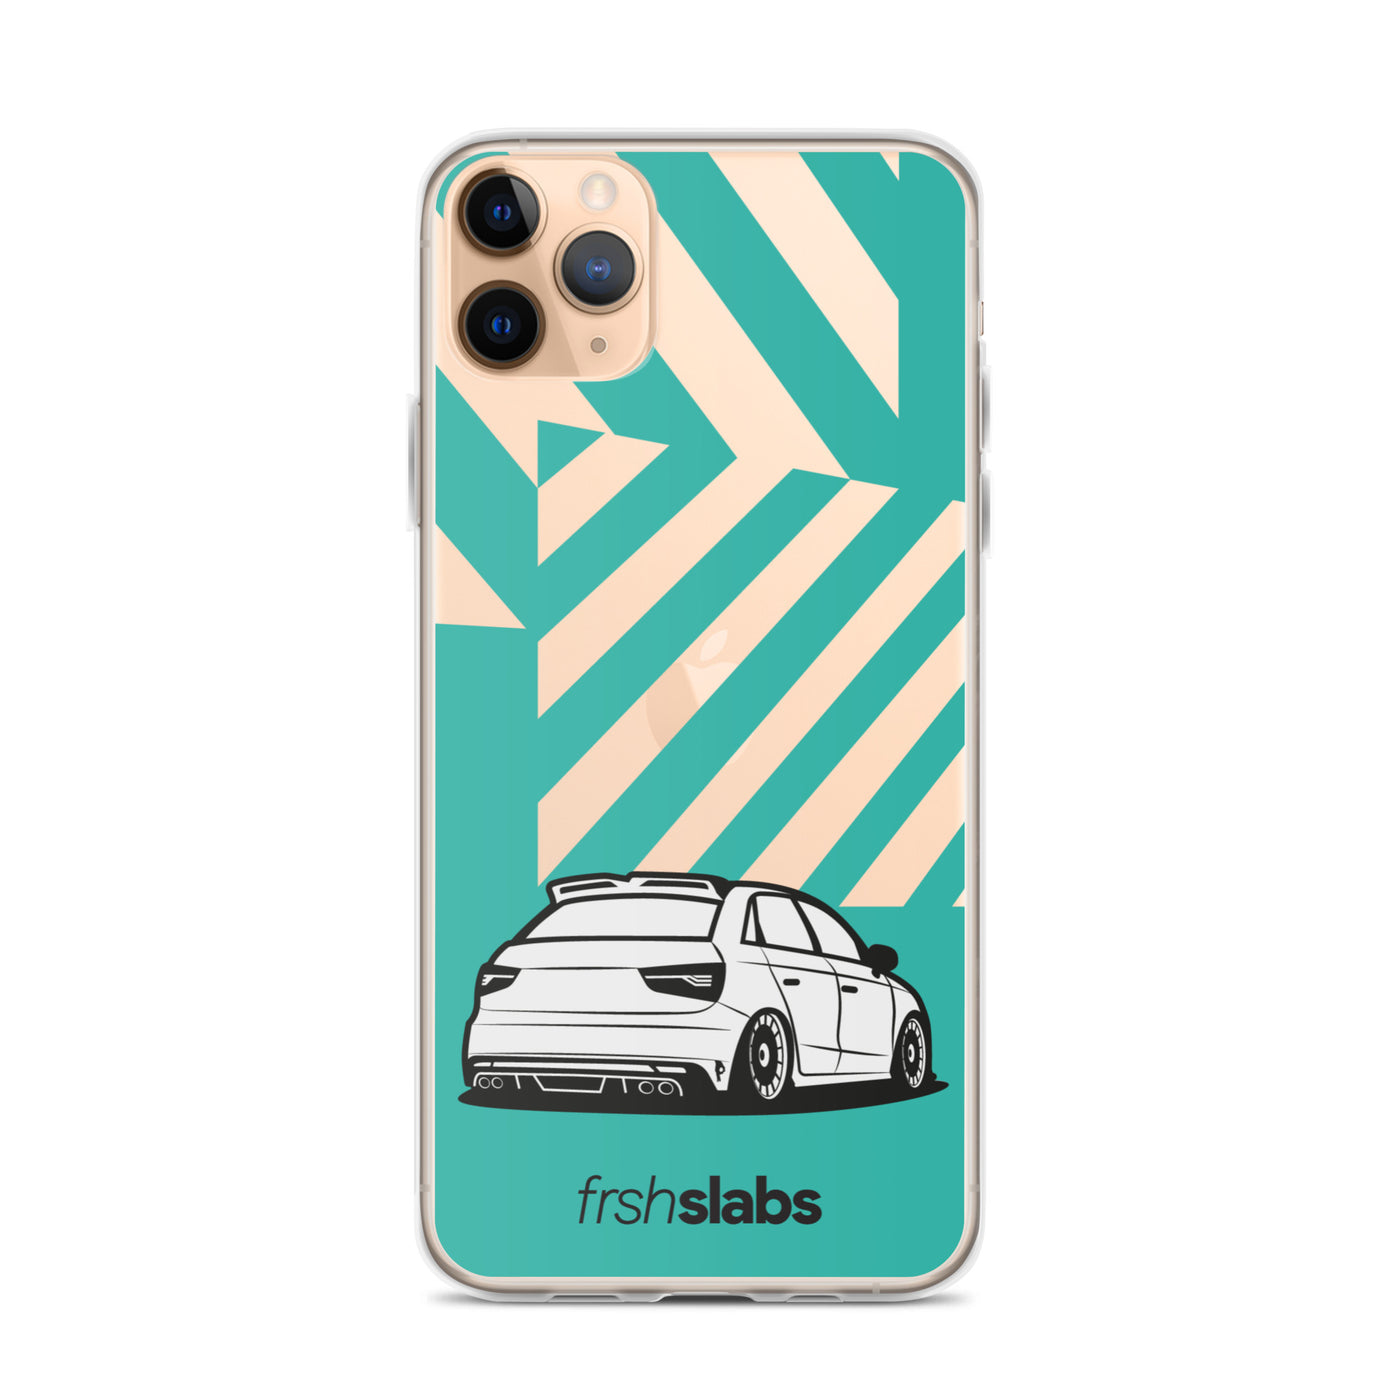 Your Car iPhone Case - Techno